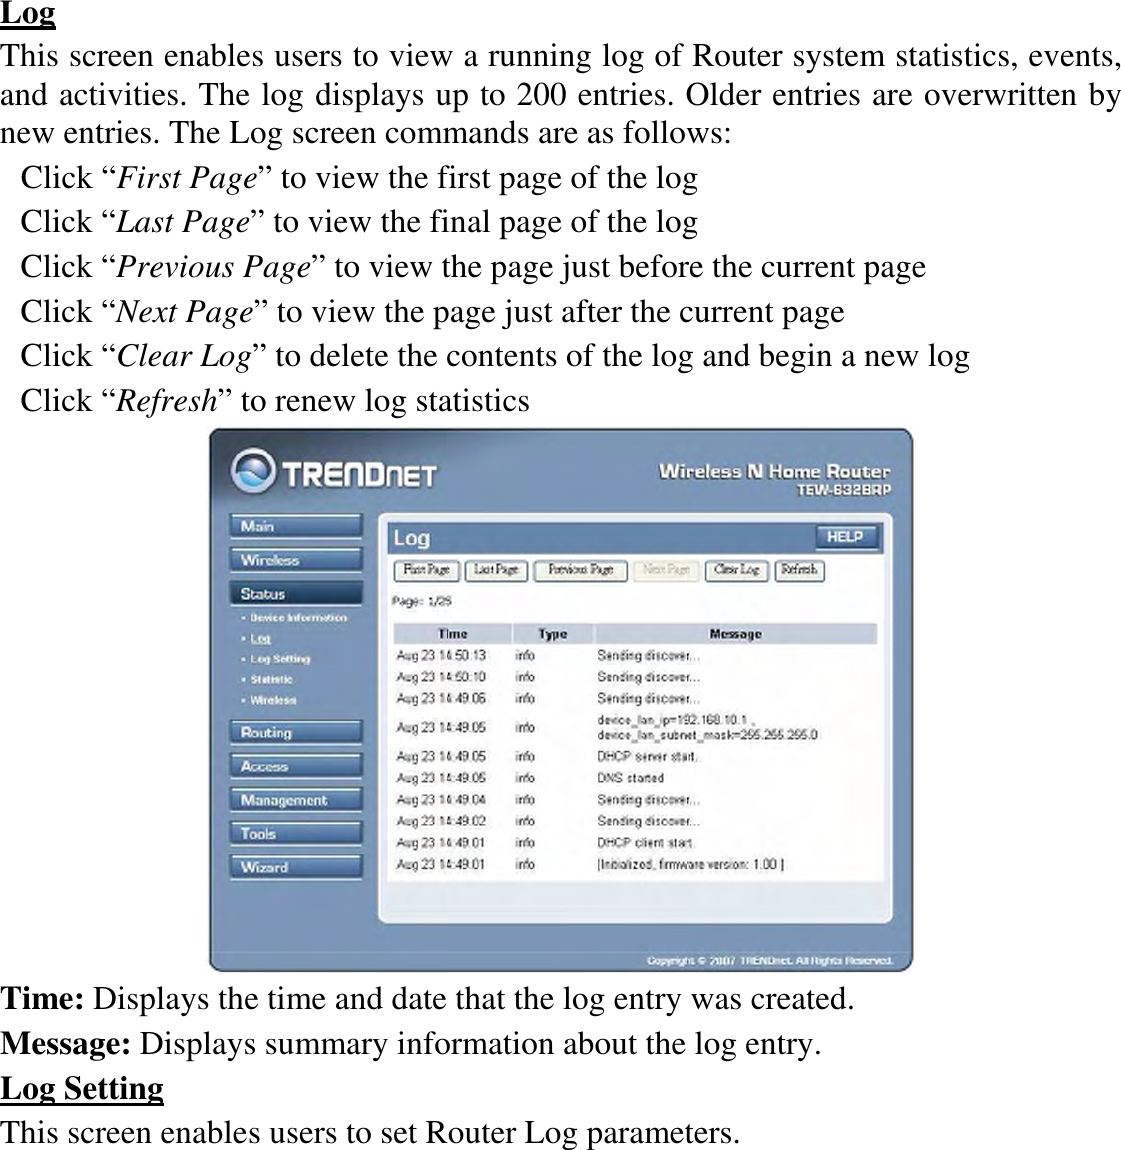 Log This screen enables users to view a running log of Router system statistics, events, and activities. The log displays up to 200 entries. Older entries are overwritten by new entries. The Log screen commands are as follows: Click “First Page” to view the first page of the log Click “Last Page” to view the final page of the log Click “Previous Page” to view the page just before the current page Click “Next Page” to view the page just after the current page Click “Clear Log” to delete the contents of the log and begin a new log Click “Refresh” to renew log statistics    Time: Displays the time and date that the log entry was created. Message: Displays summary information about the log entry. Log Setting This screen enables users to set Router Log parameters. 